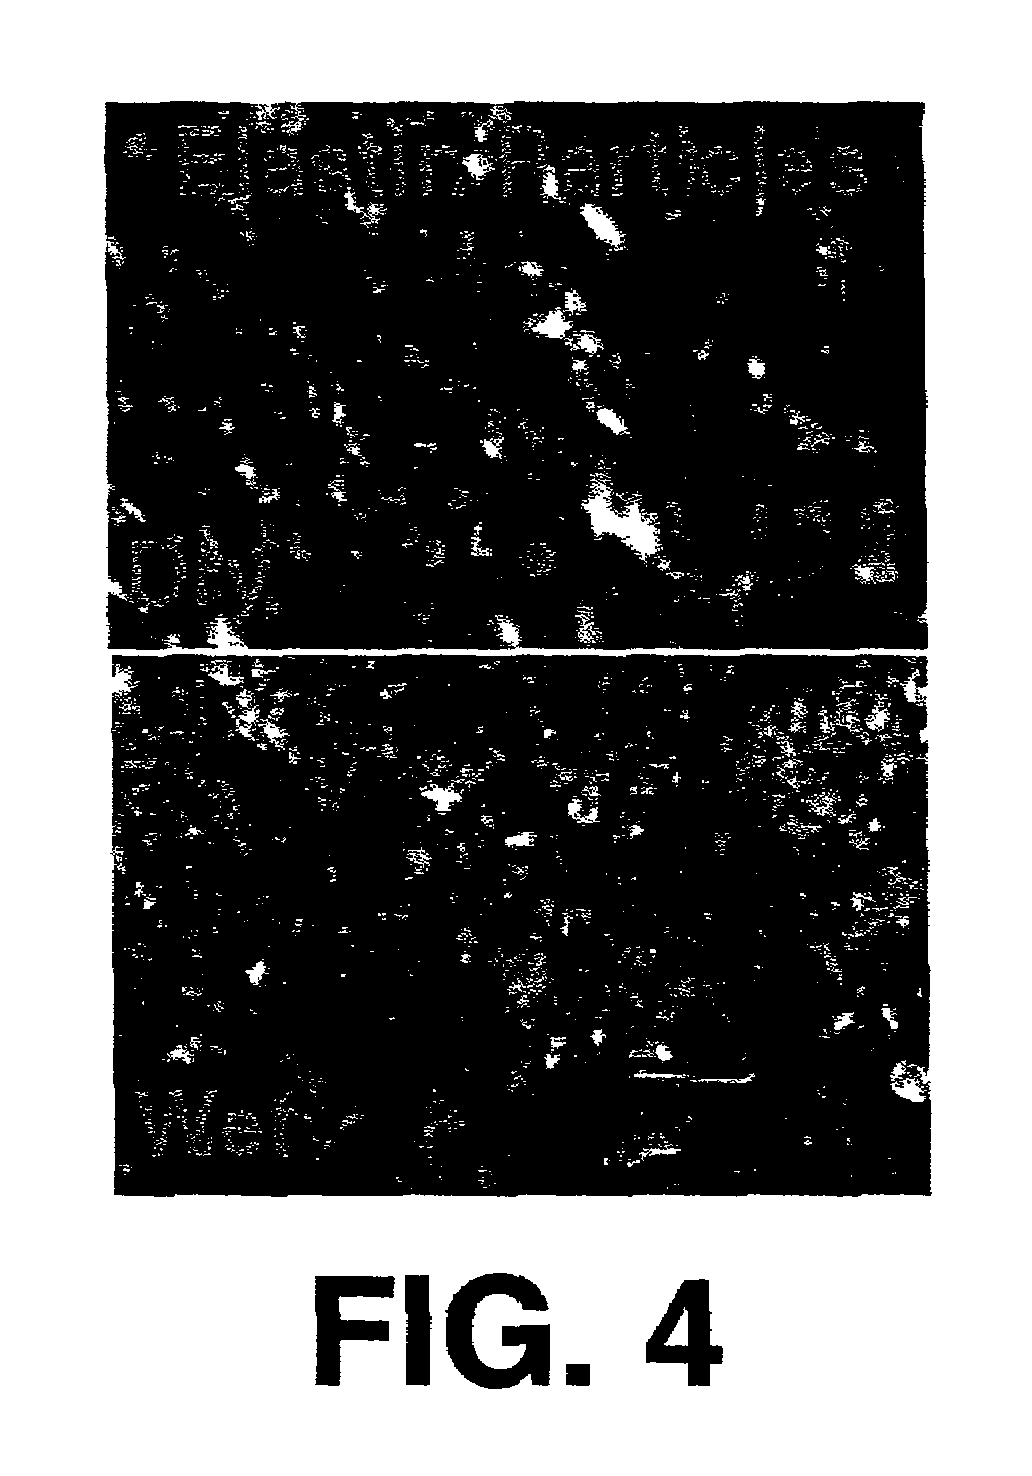 Protein matrix materials, devices and methods of making and using thereof